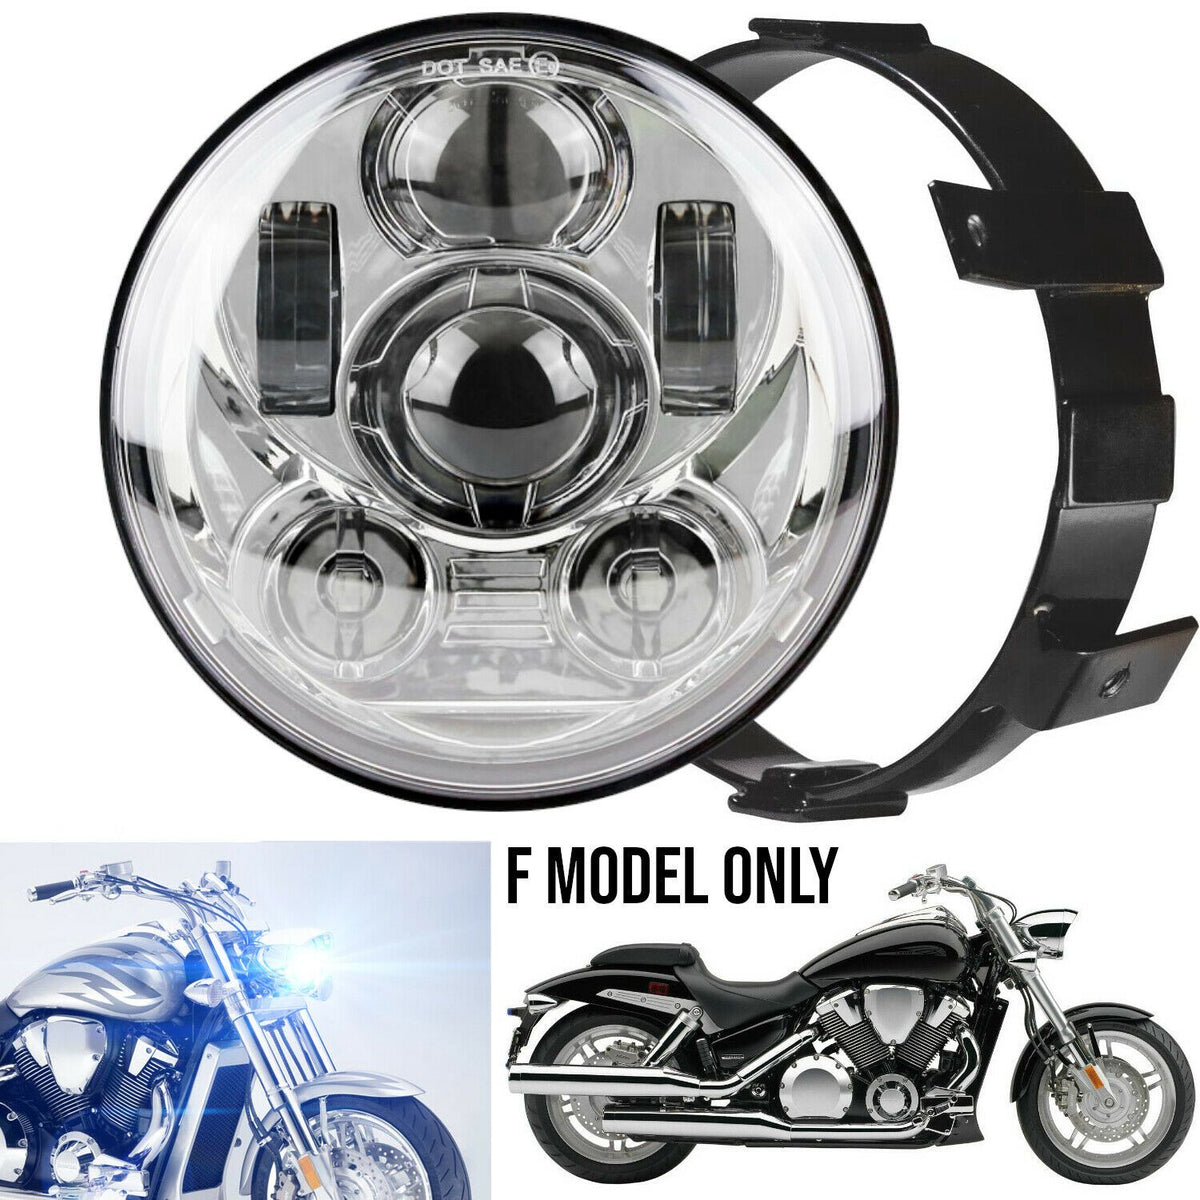 Eagle Lights Generation III LED Headlight For Honda VTX 1300 and 1800 F- MODEL ONLY- Includes VTX Bracket and Hardware